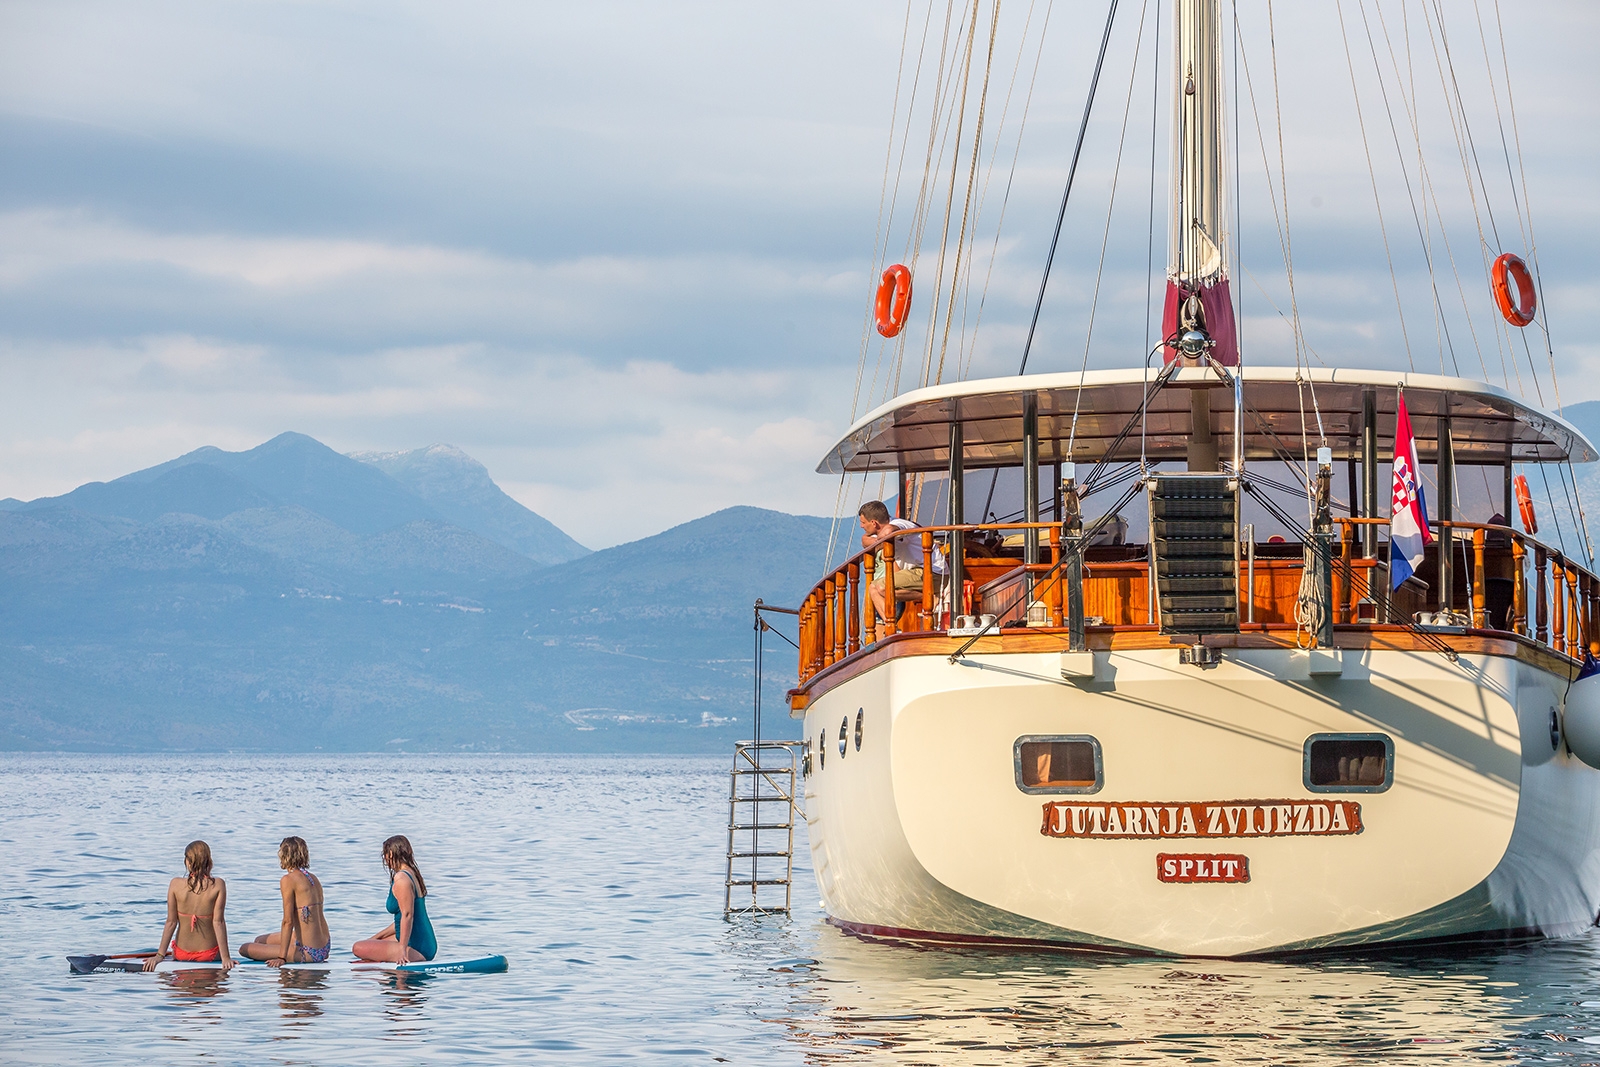 Rear view of Morning Star with people in the water in Croatia